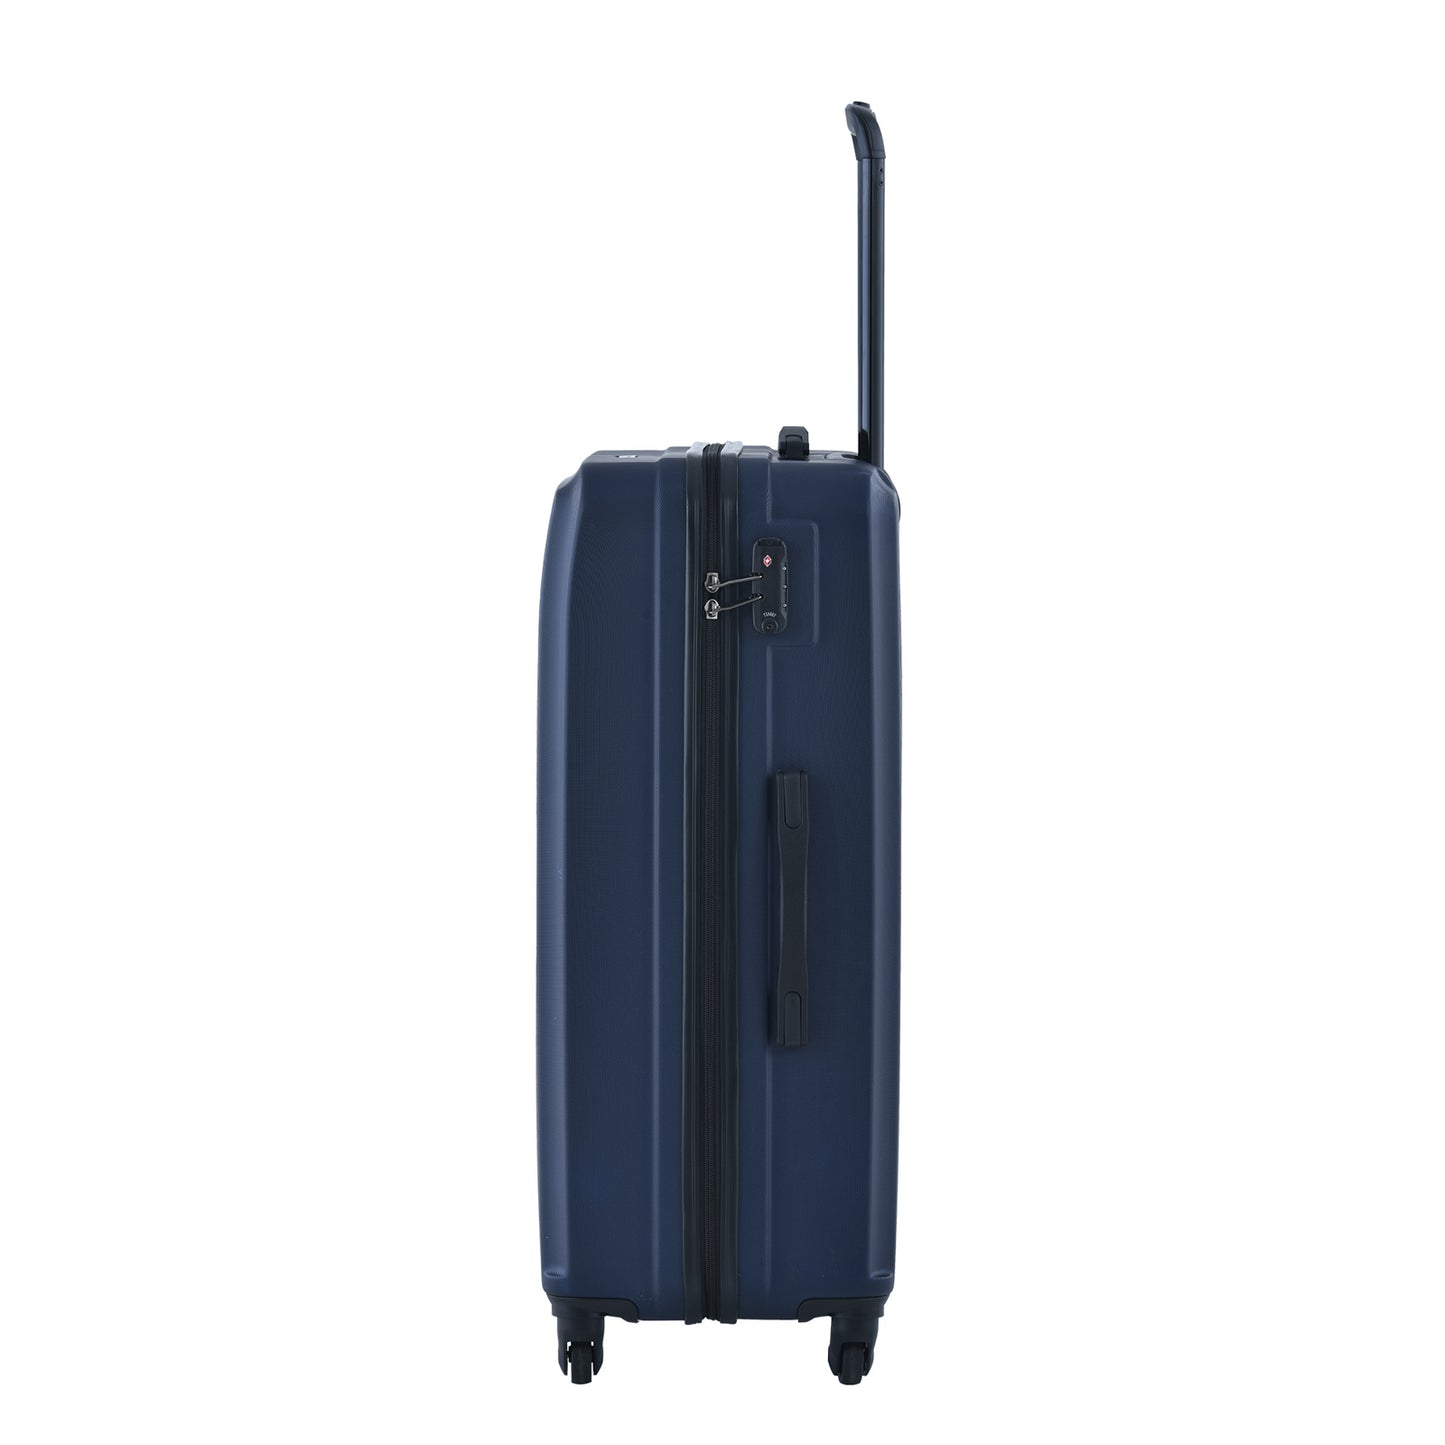 3 Piece Luggage Sets ABS Lightweight Suitcase with Two Hooks, Spinner Wheels, TSA Lock, (20/24/28) Navy